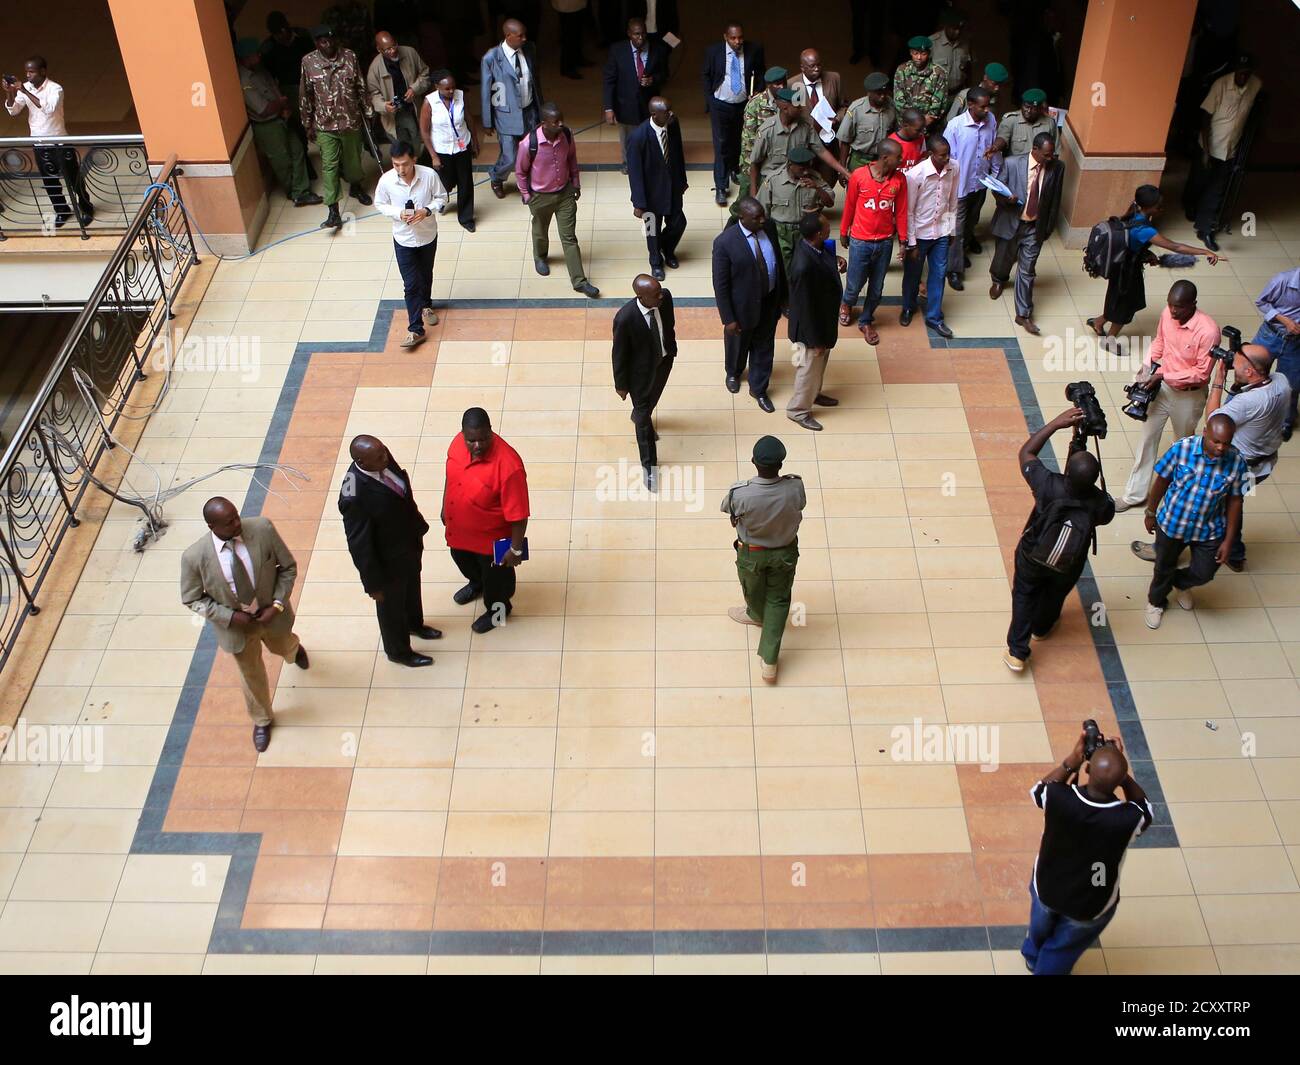 The four men (top R) charged with helping al Qaeda-linked militants launch an attack on the Westgate mall, are escorted by prison warders through the ground floor of the building during a court session in Nairobi January 21, 2014. The trial for the four Somali men, Mohamed Ahmed Abdi, Liban Abdullah Omar, Hussein Hassan, and Adan Mohamed Ibrahim, accused of giving support and shelter to gunmen who killed at least 67 people during the assault on Nairobi's Westgate complex that started on September 21, 2013, began last week. The assault was claimed by the Somali Islamist rebel group al Shabaab.  Stock Photo